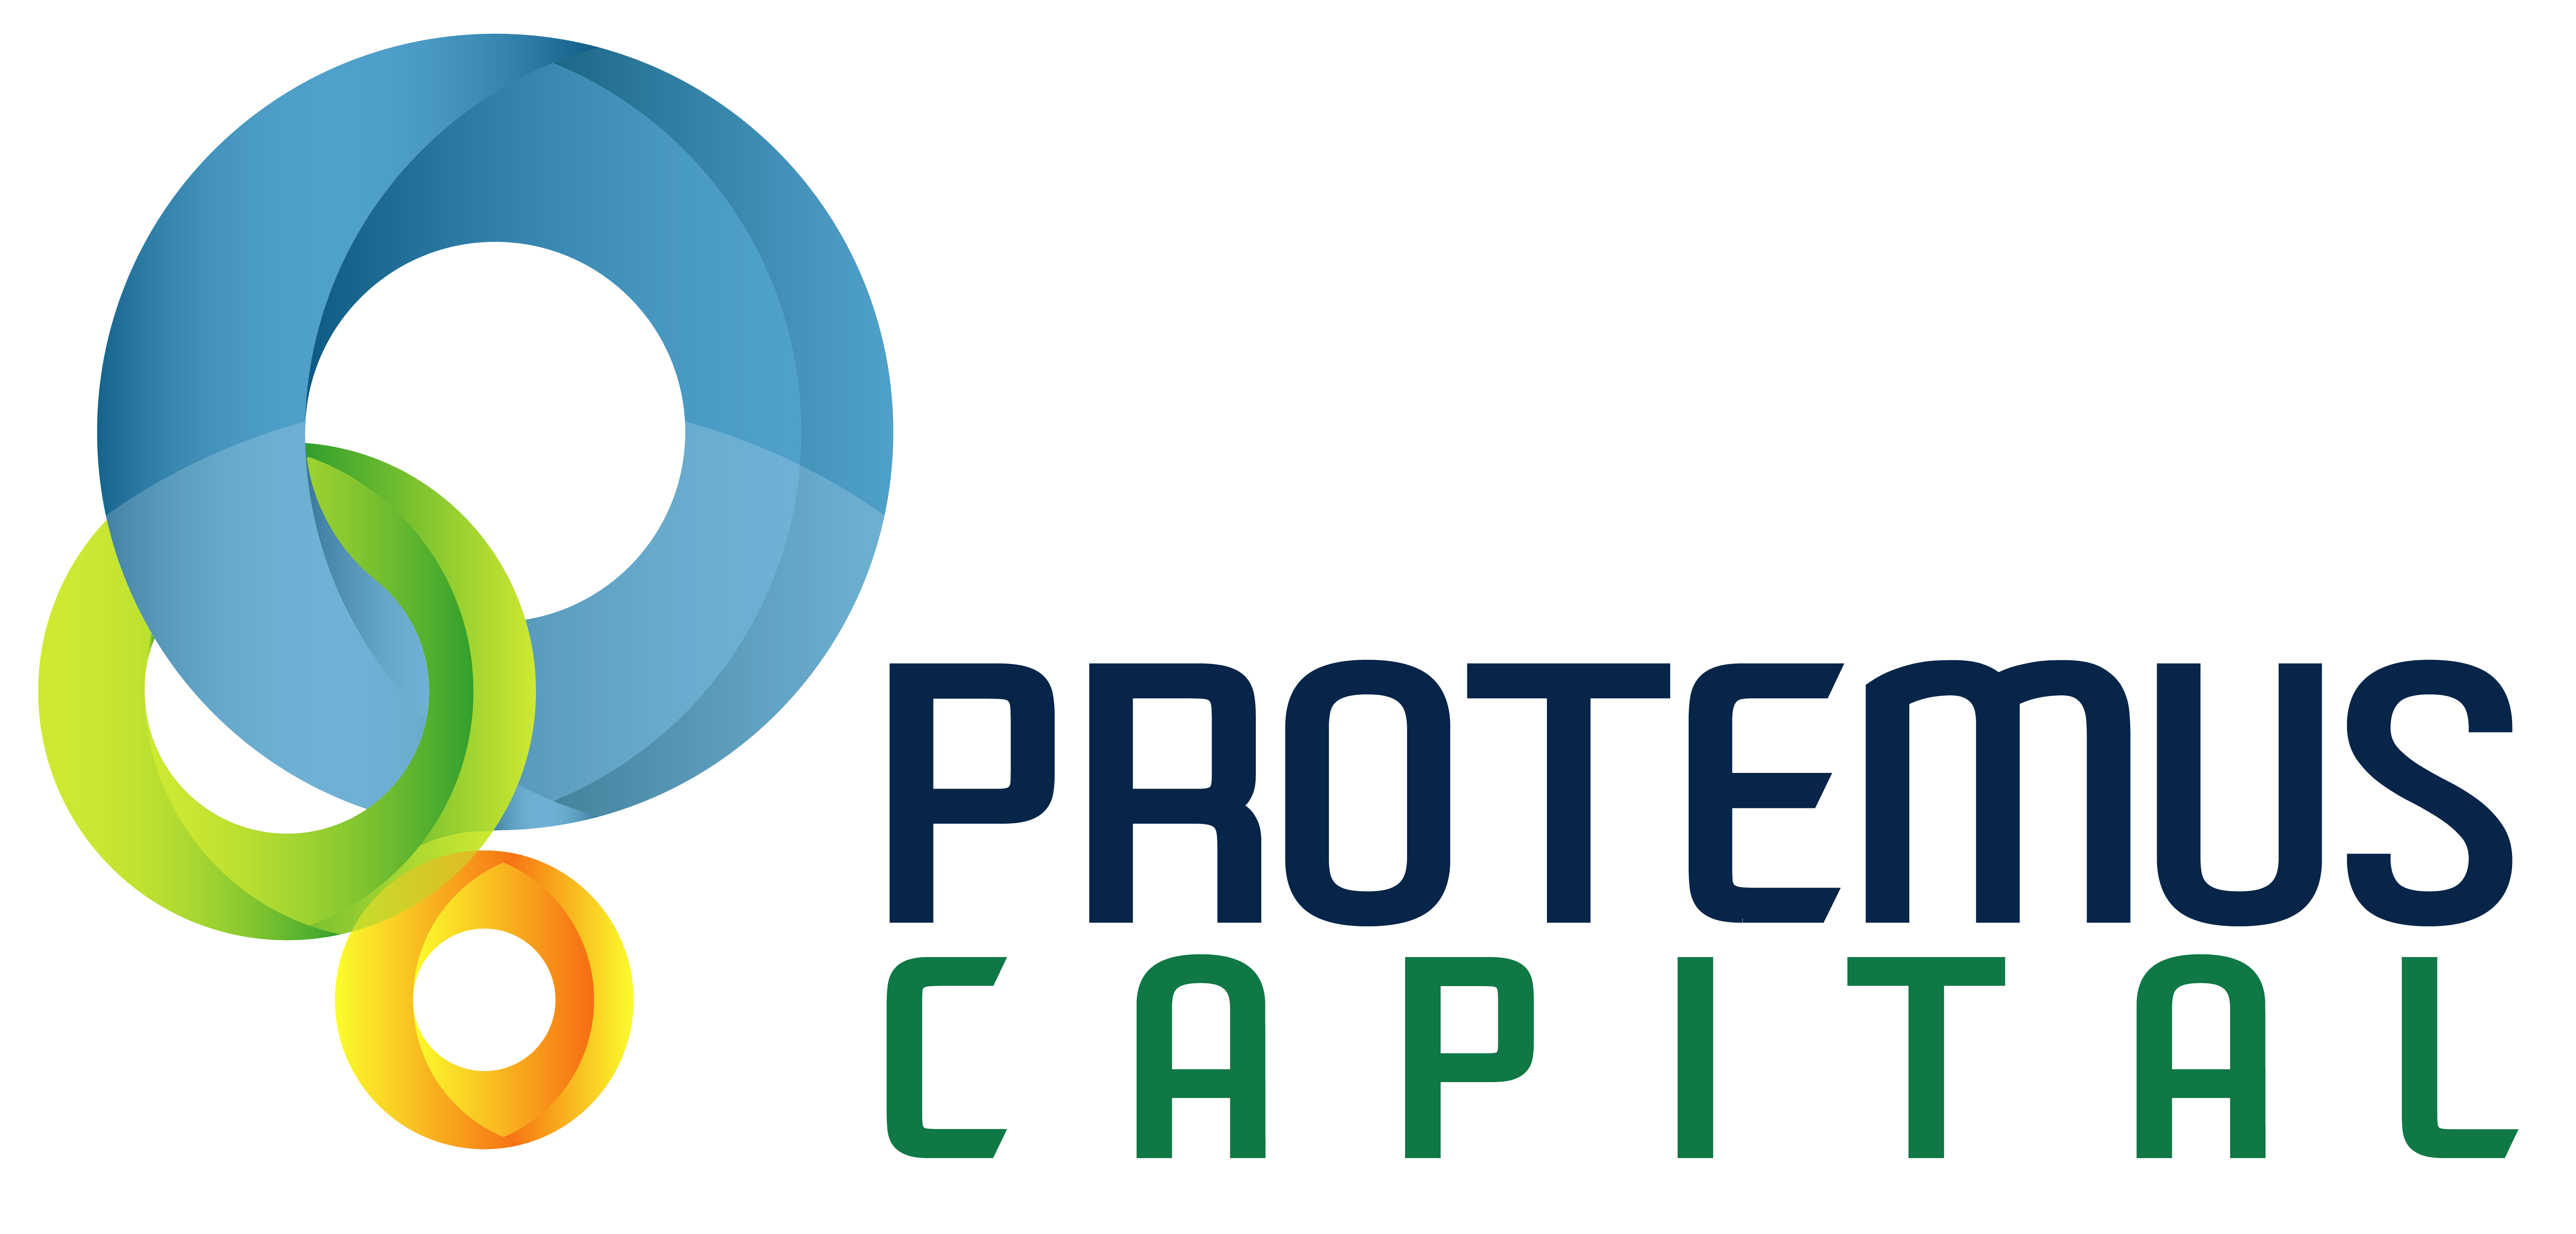 Welcome to Protemus Capital